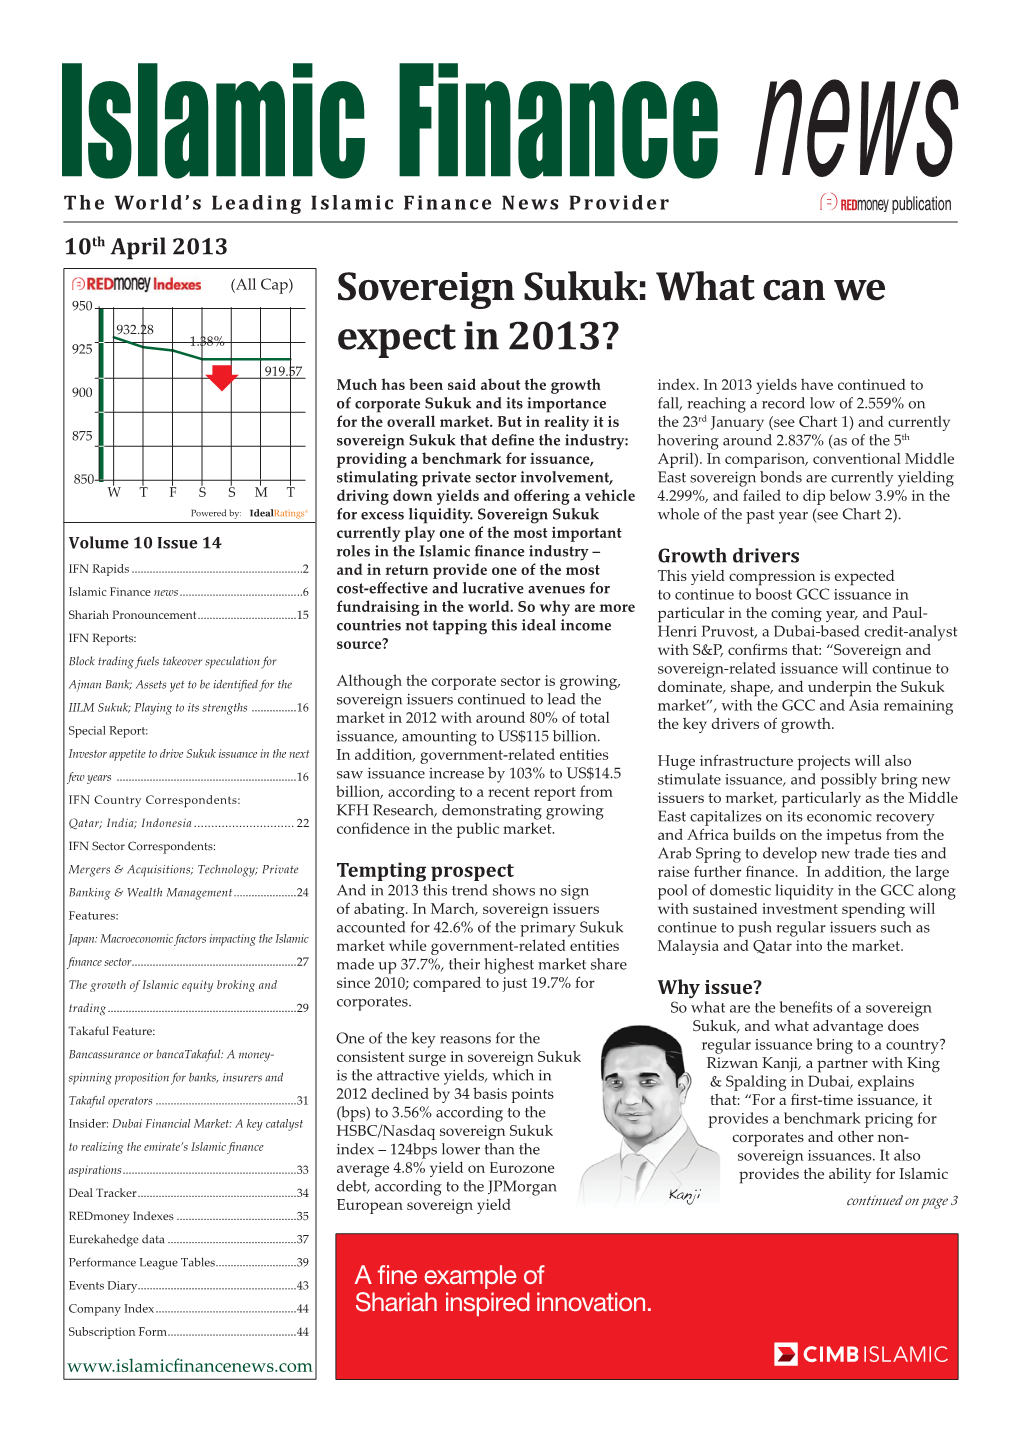 Sovereign Sukuk: What Can We Expect in 2013? Continued from Page 1